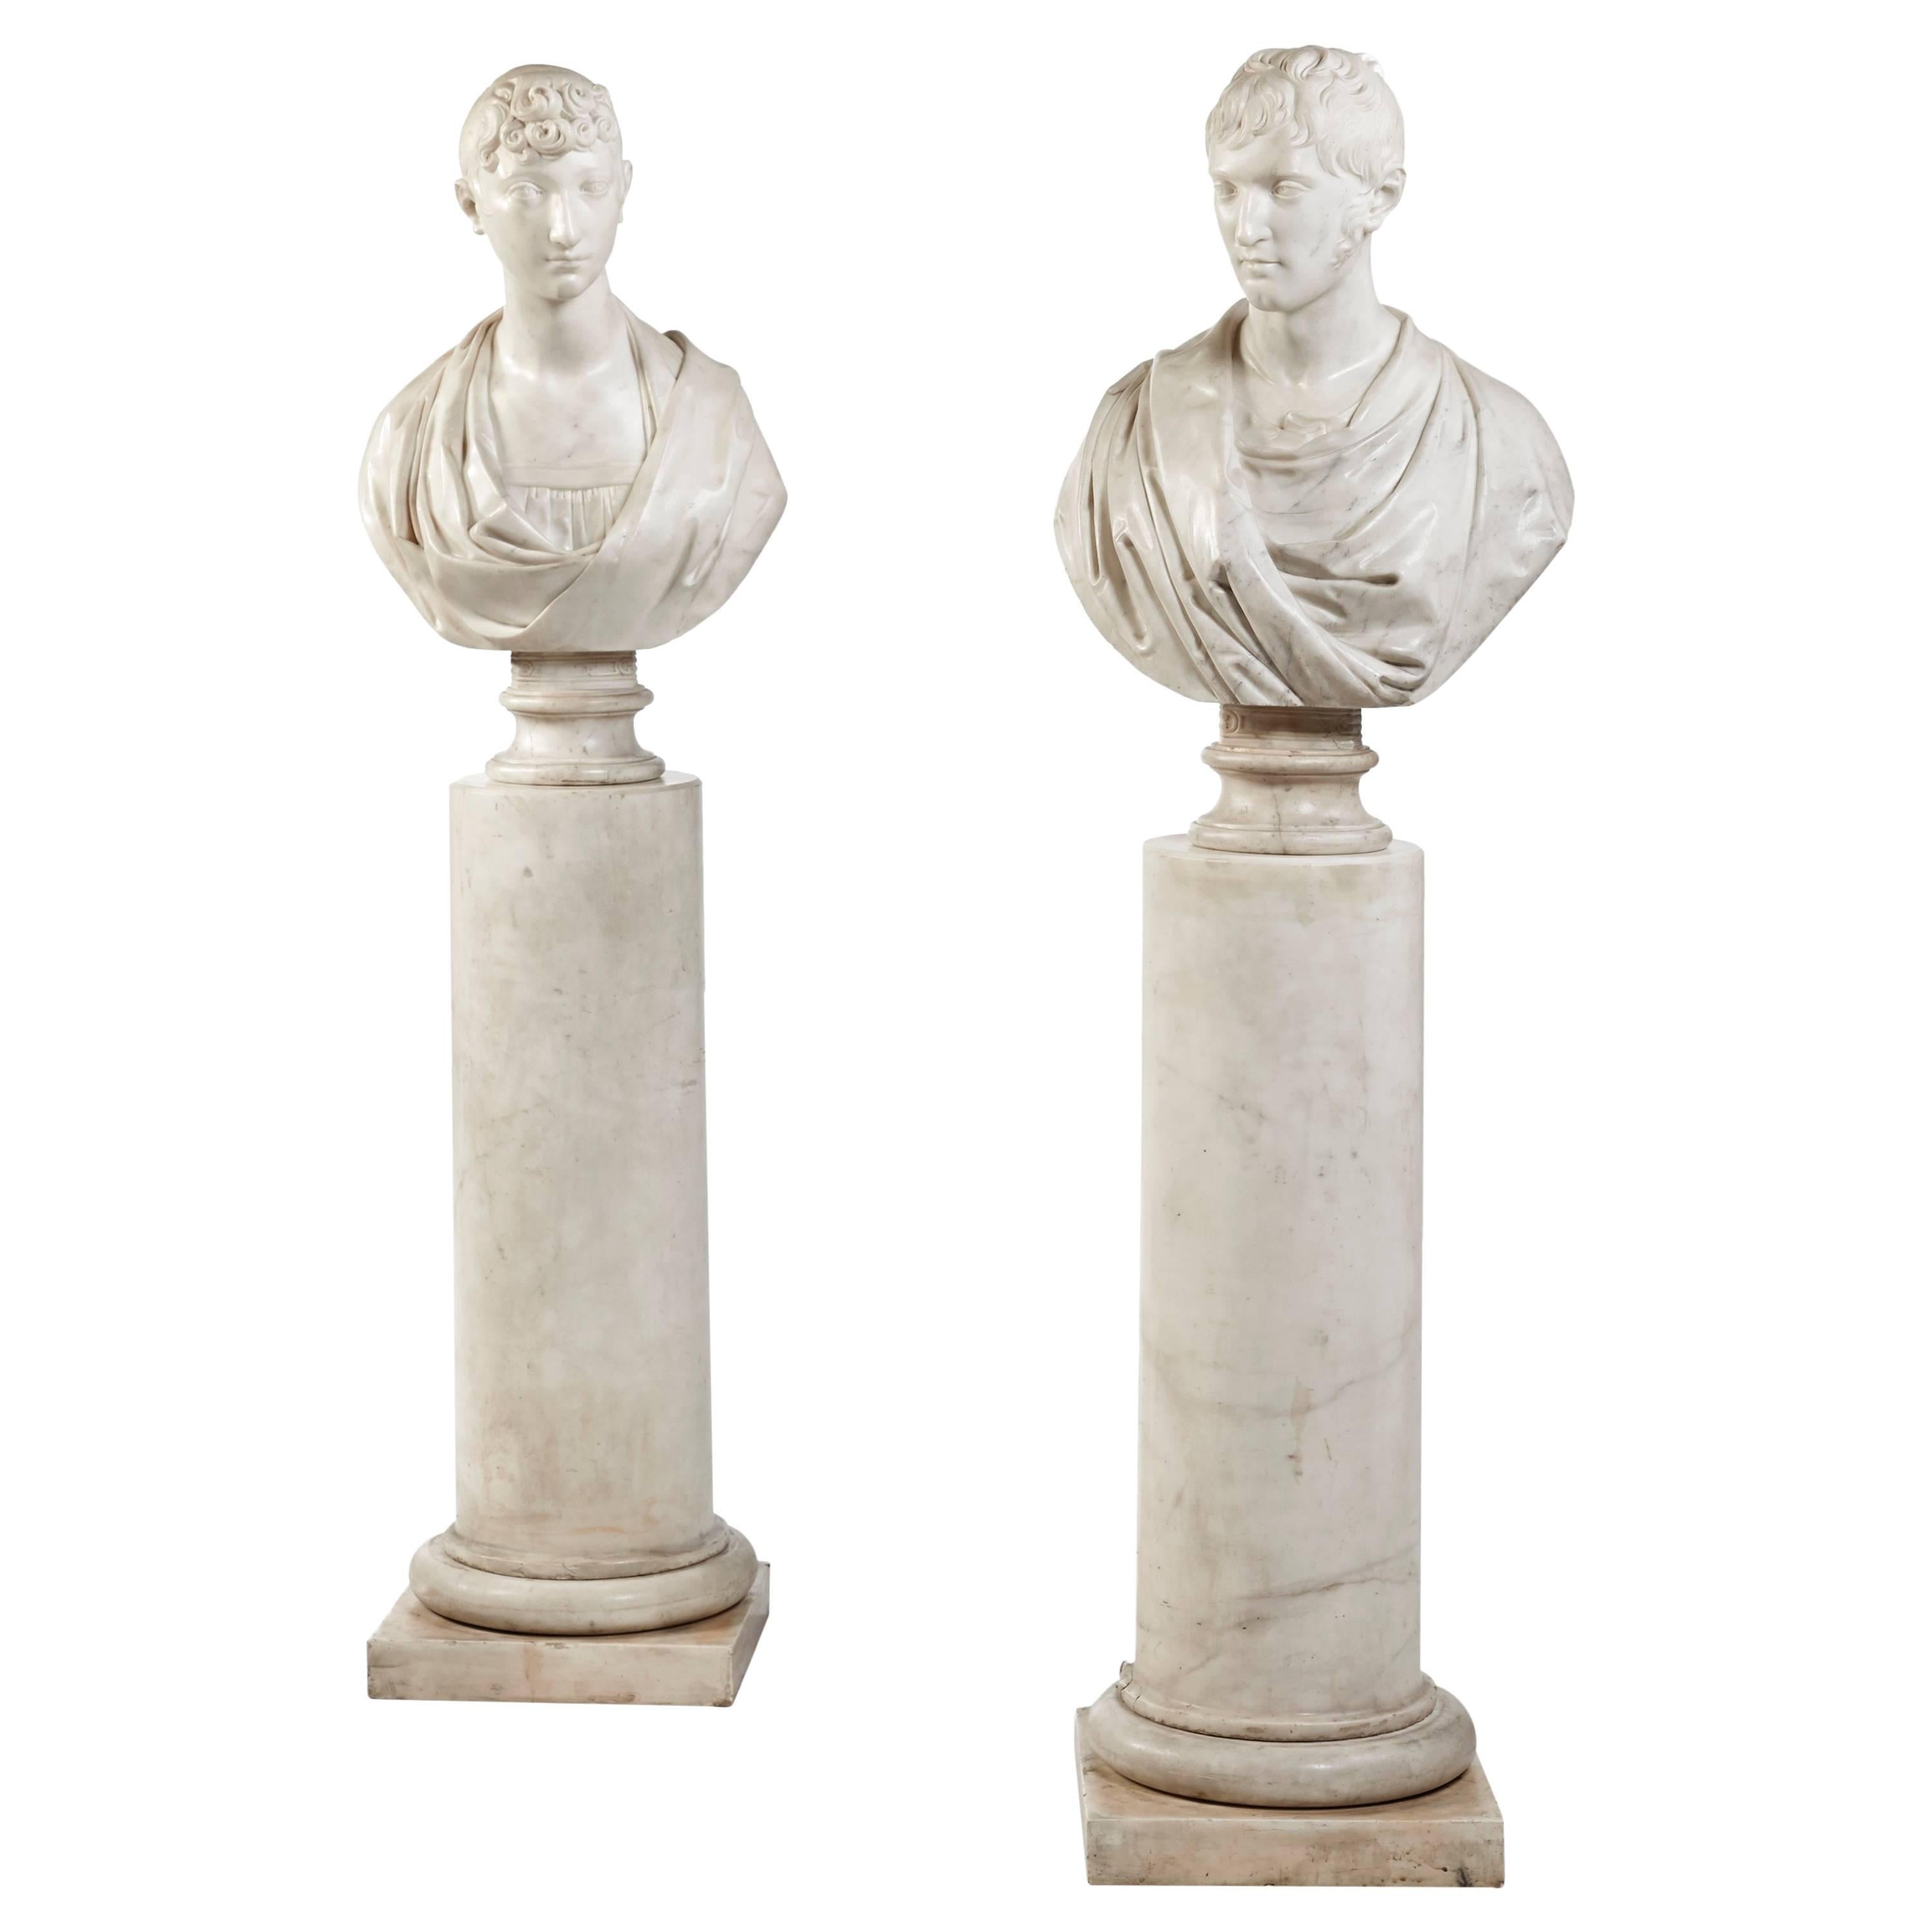 Exceptional Pair of Marble Busts on Original Columns, Italy, circa 1810 For Sale